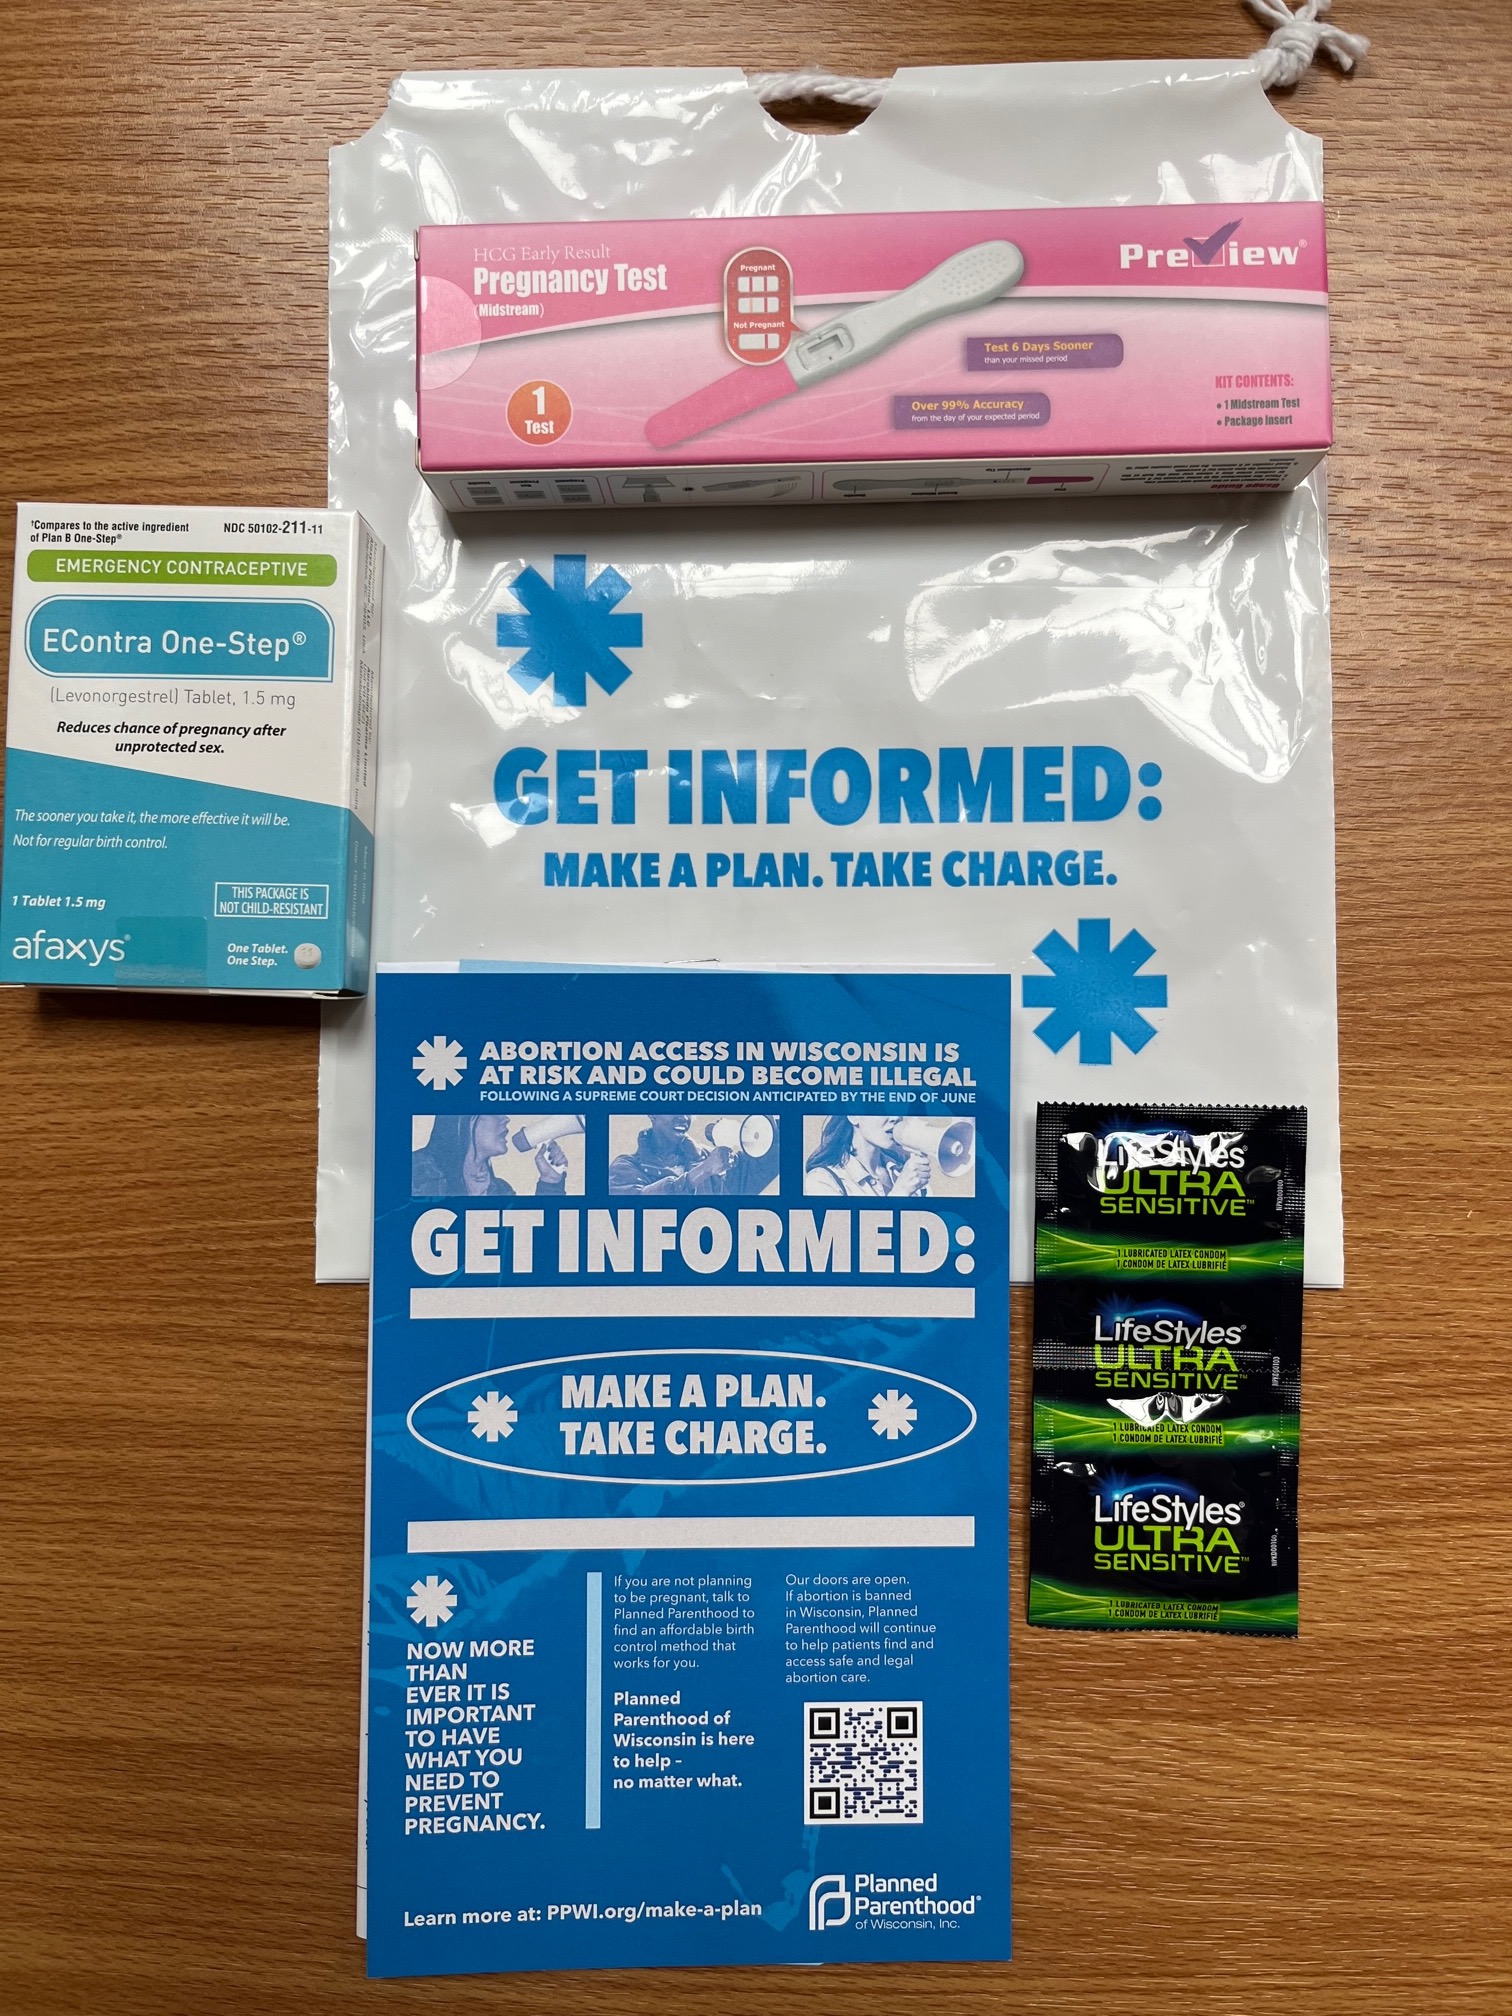 PPWI Distributing ‘Make a Plan’ Pregnancy Prevention Kits to Patients in Response to Threats to Abortion Access